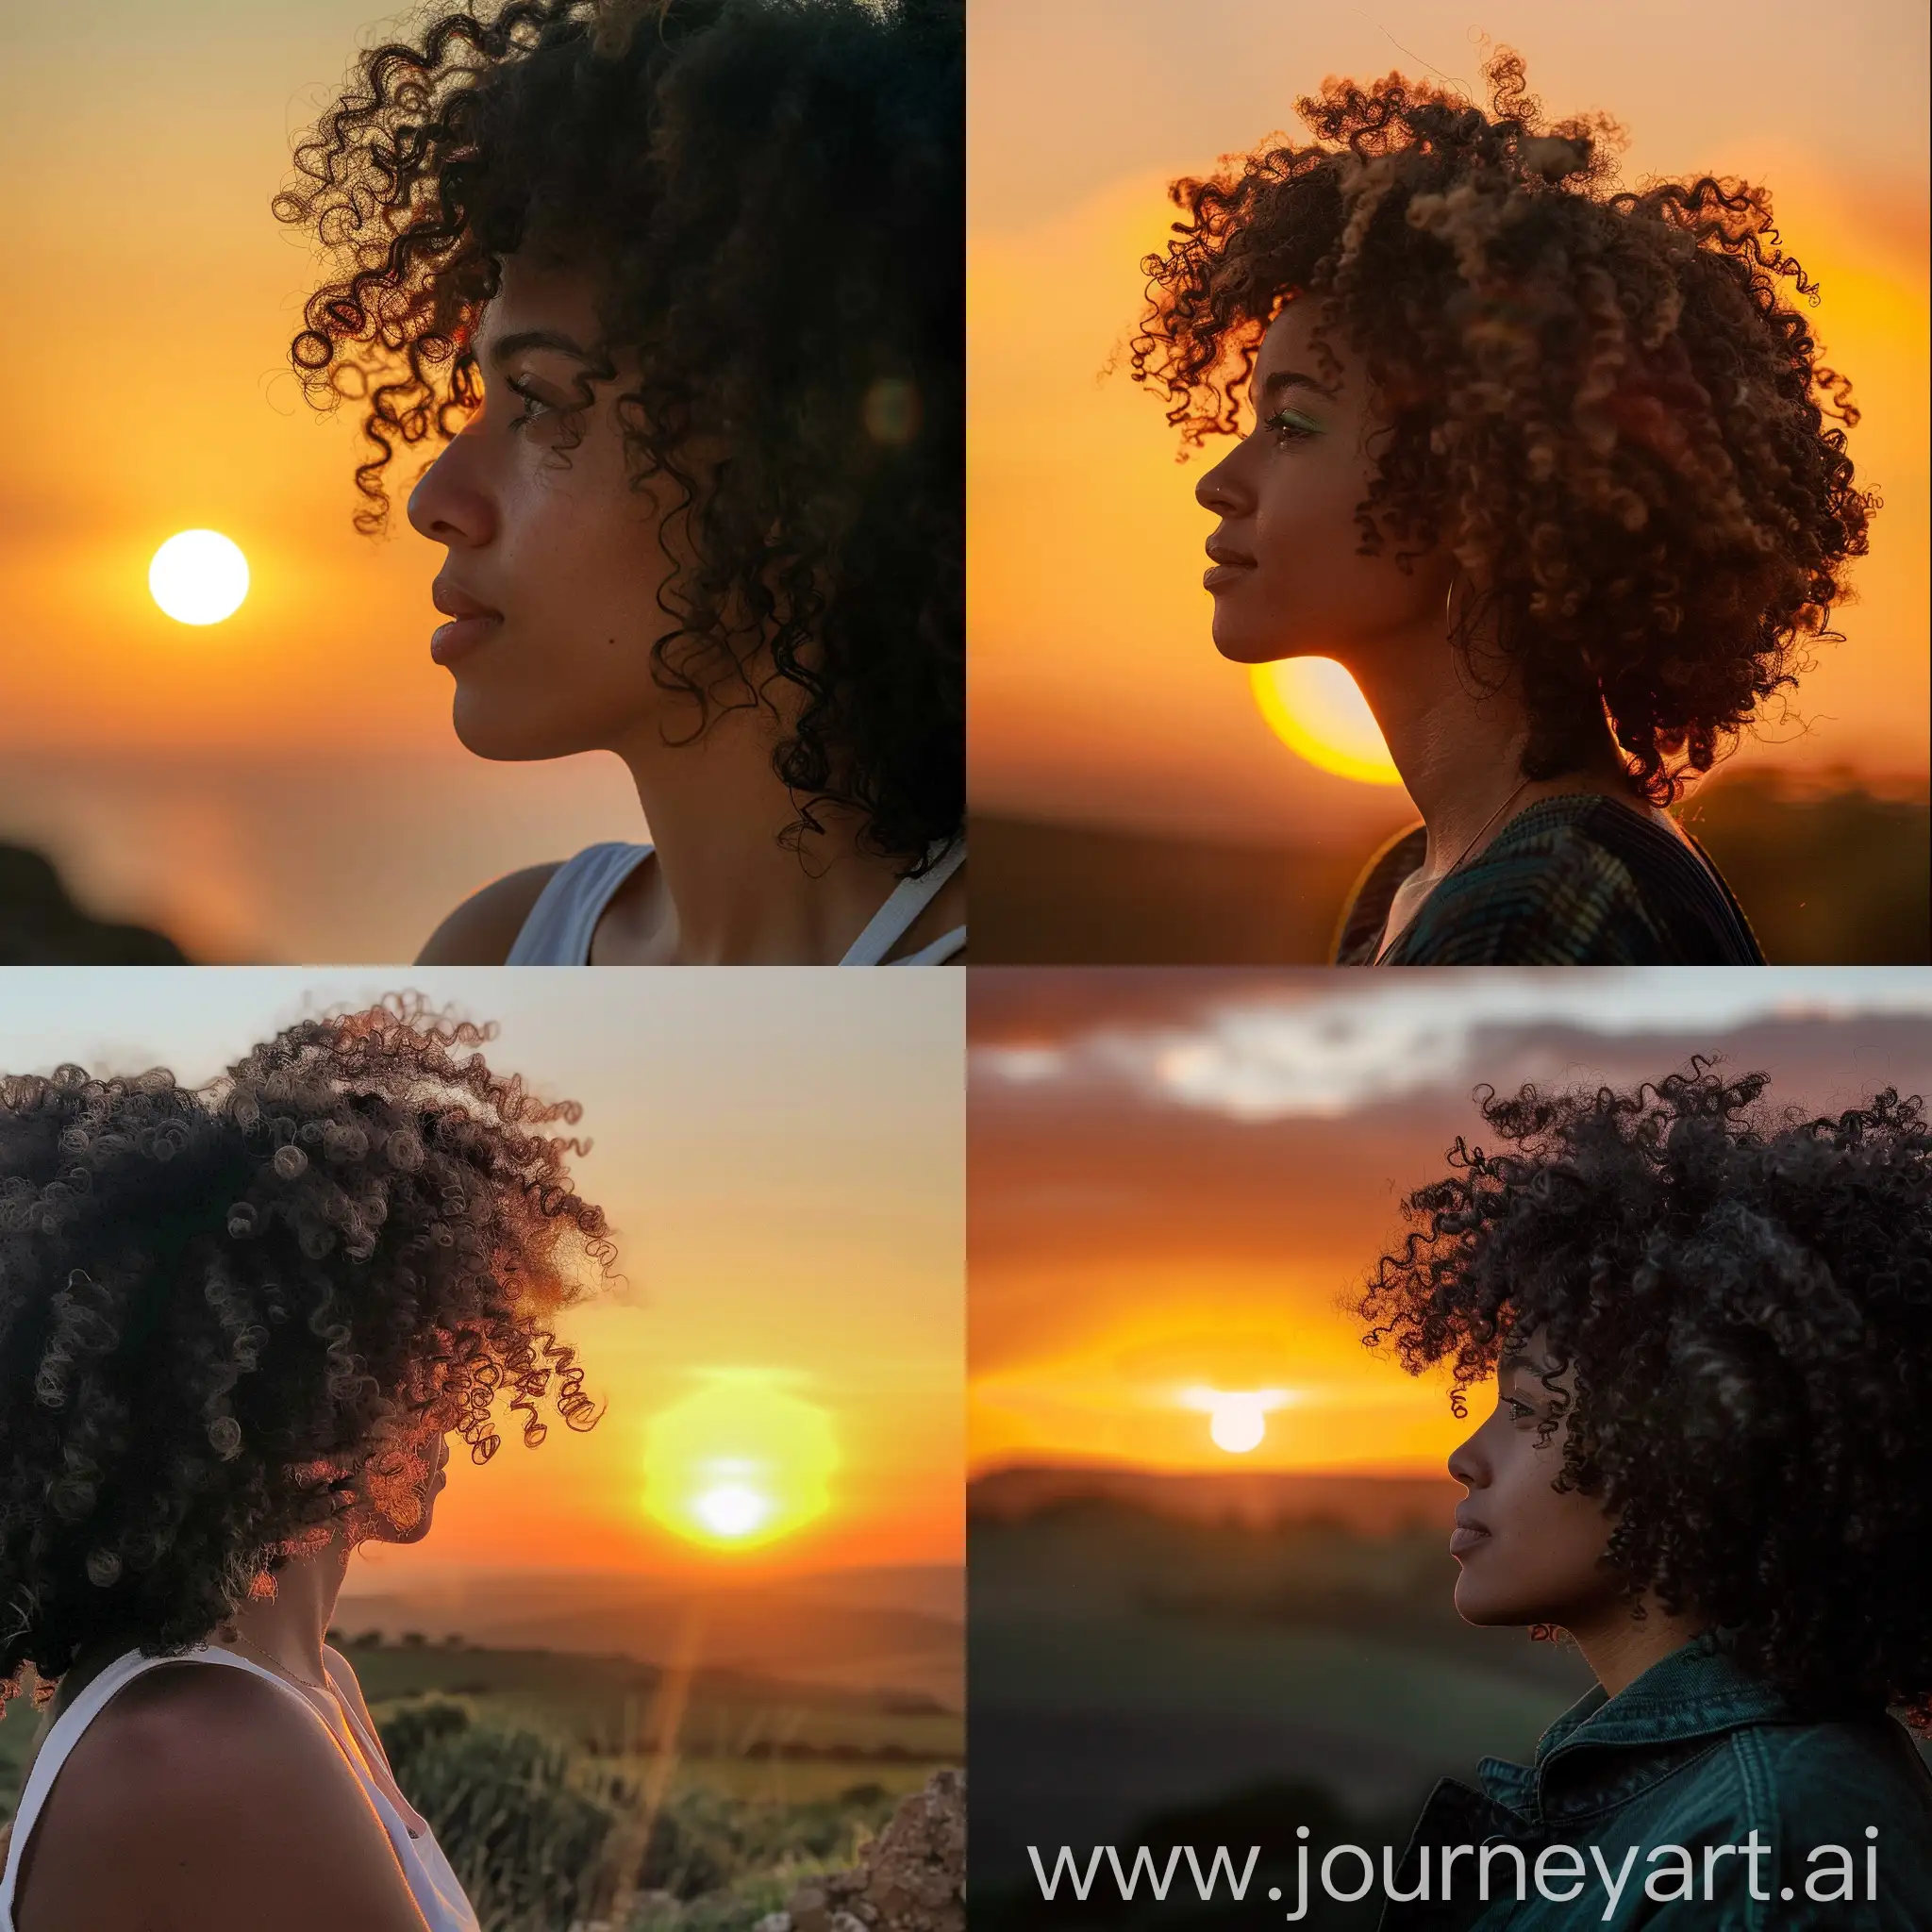 Serene-Sunset-Observation-CurlyHaired-Woman-in-Captivating-Moment